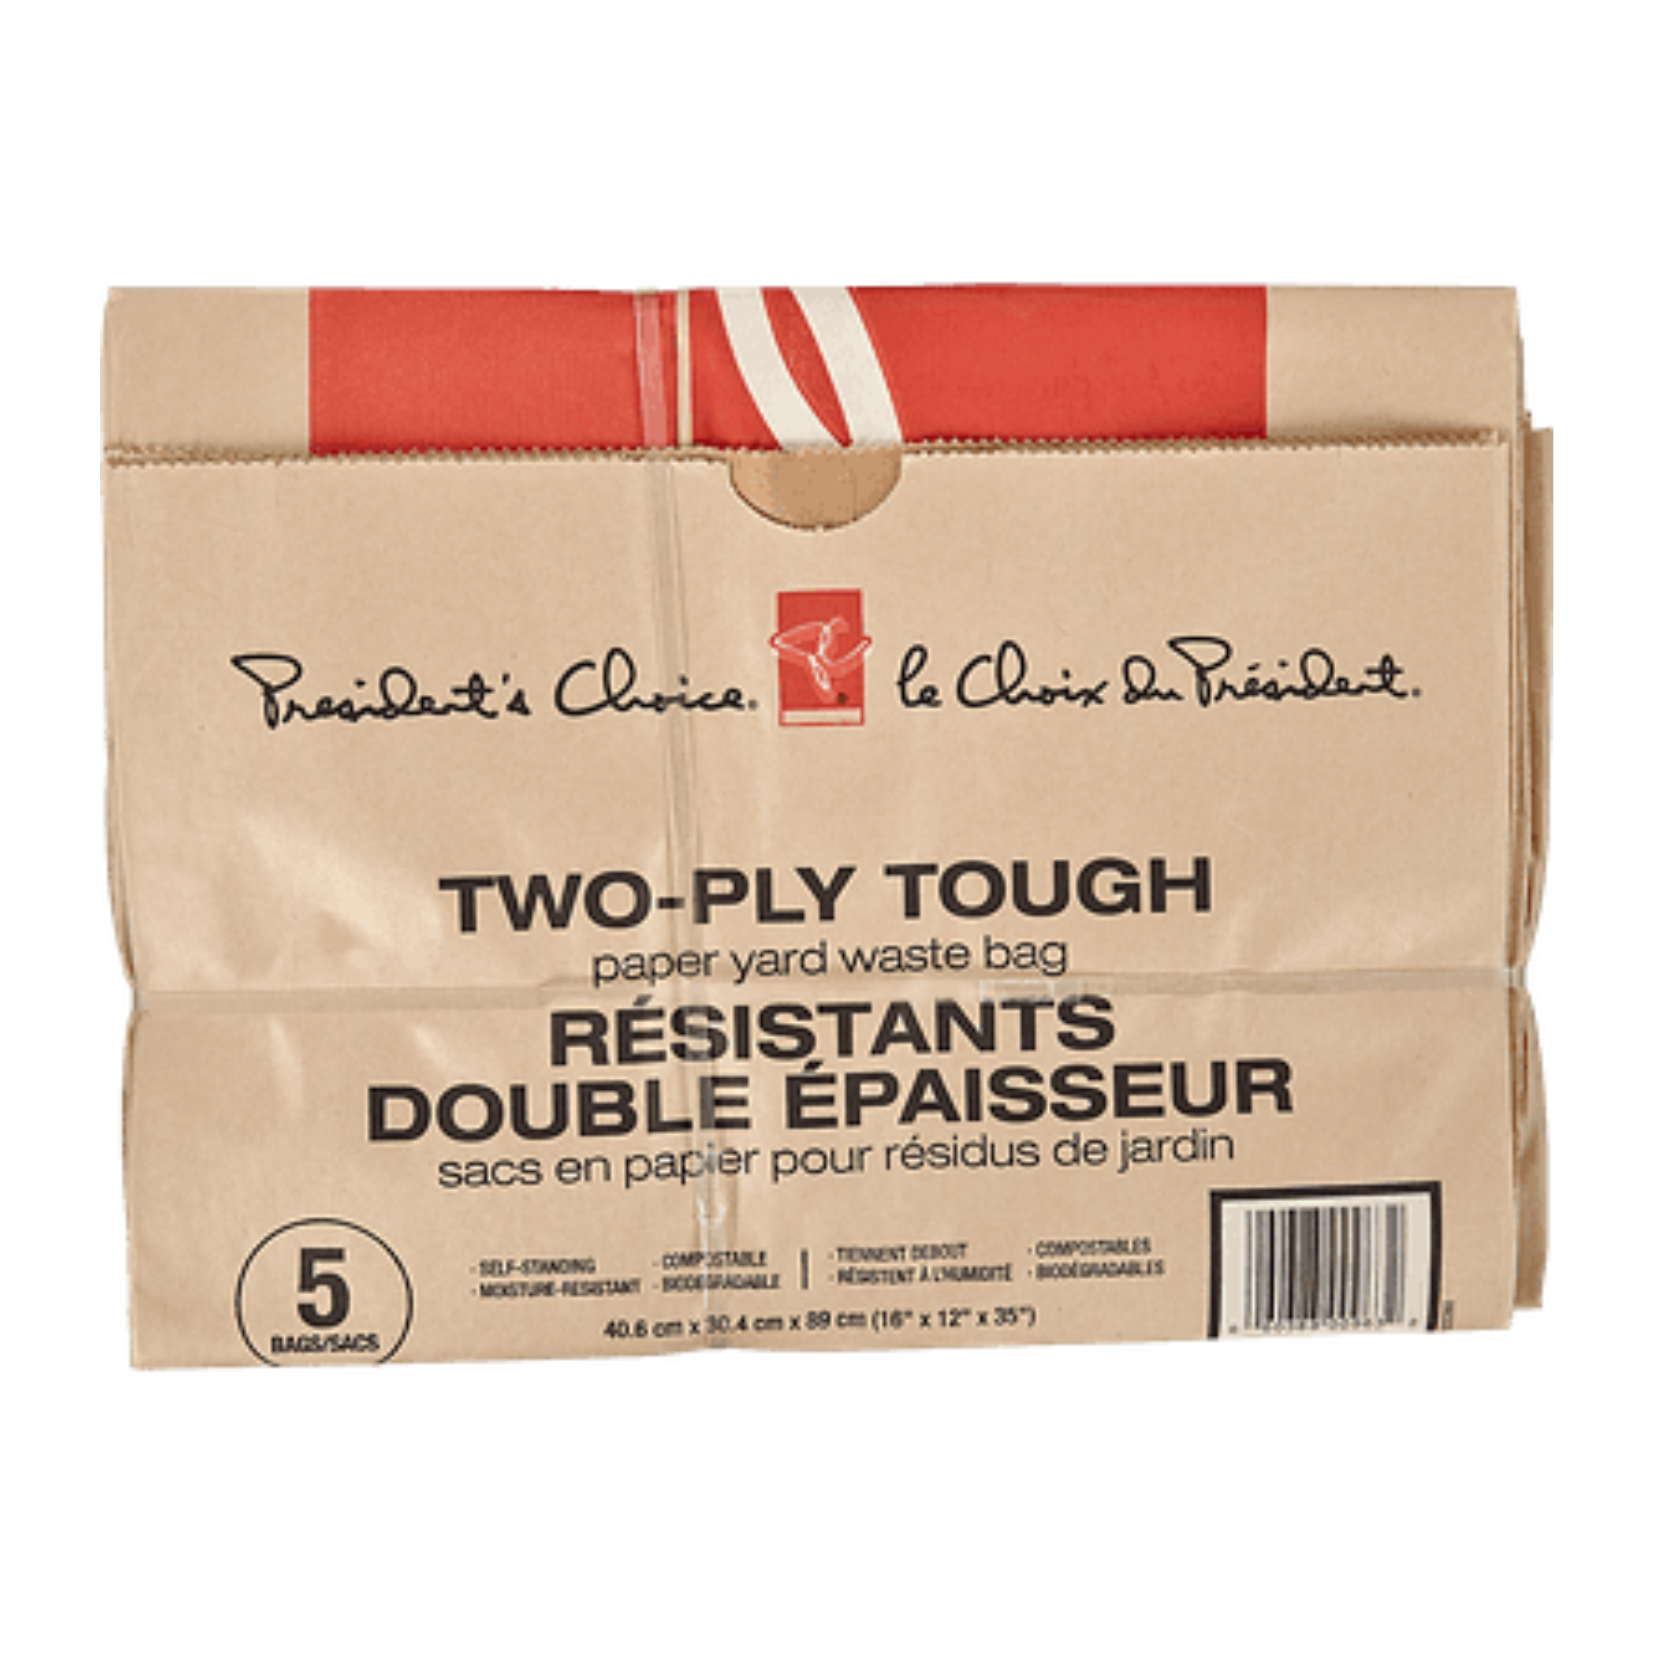 President's Choice 2-Ply Tough Paper Yard Waste Bags 5ct